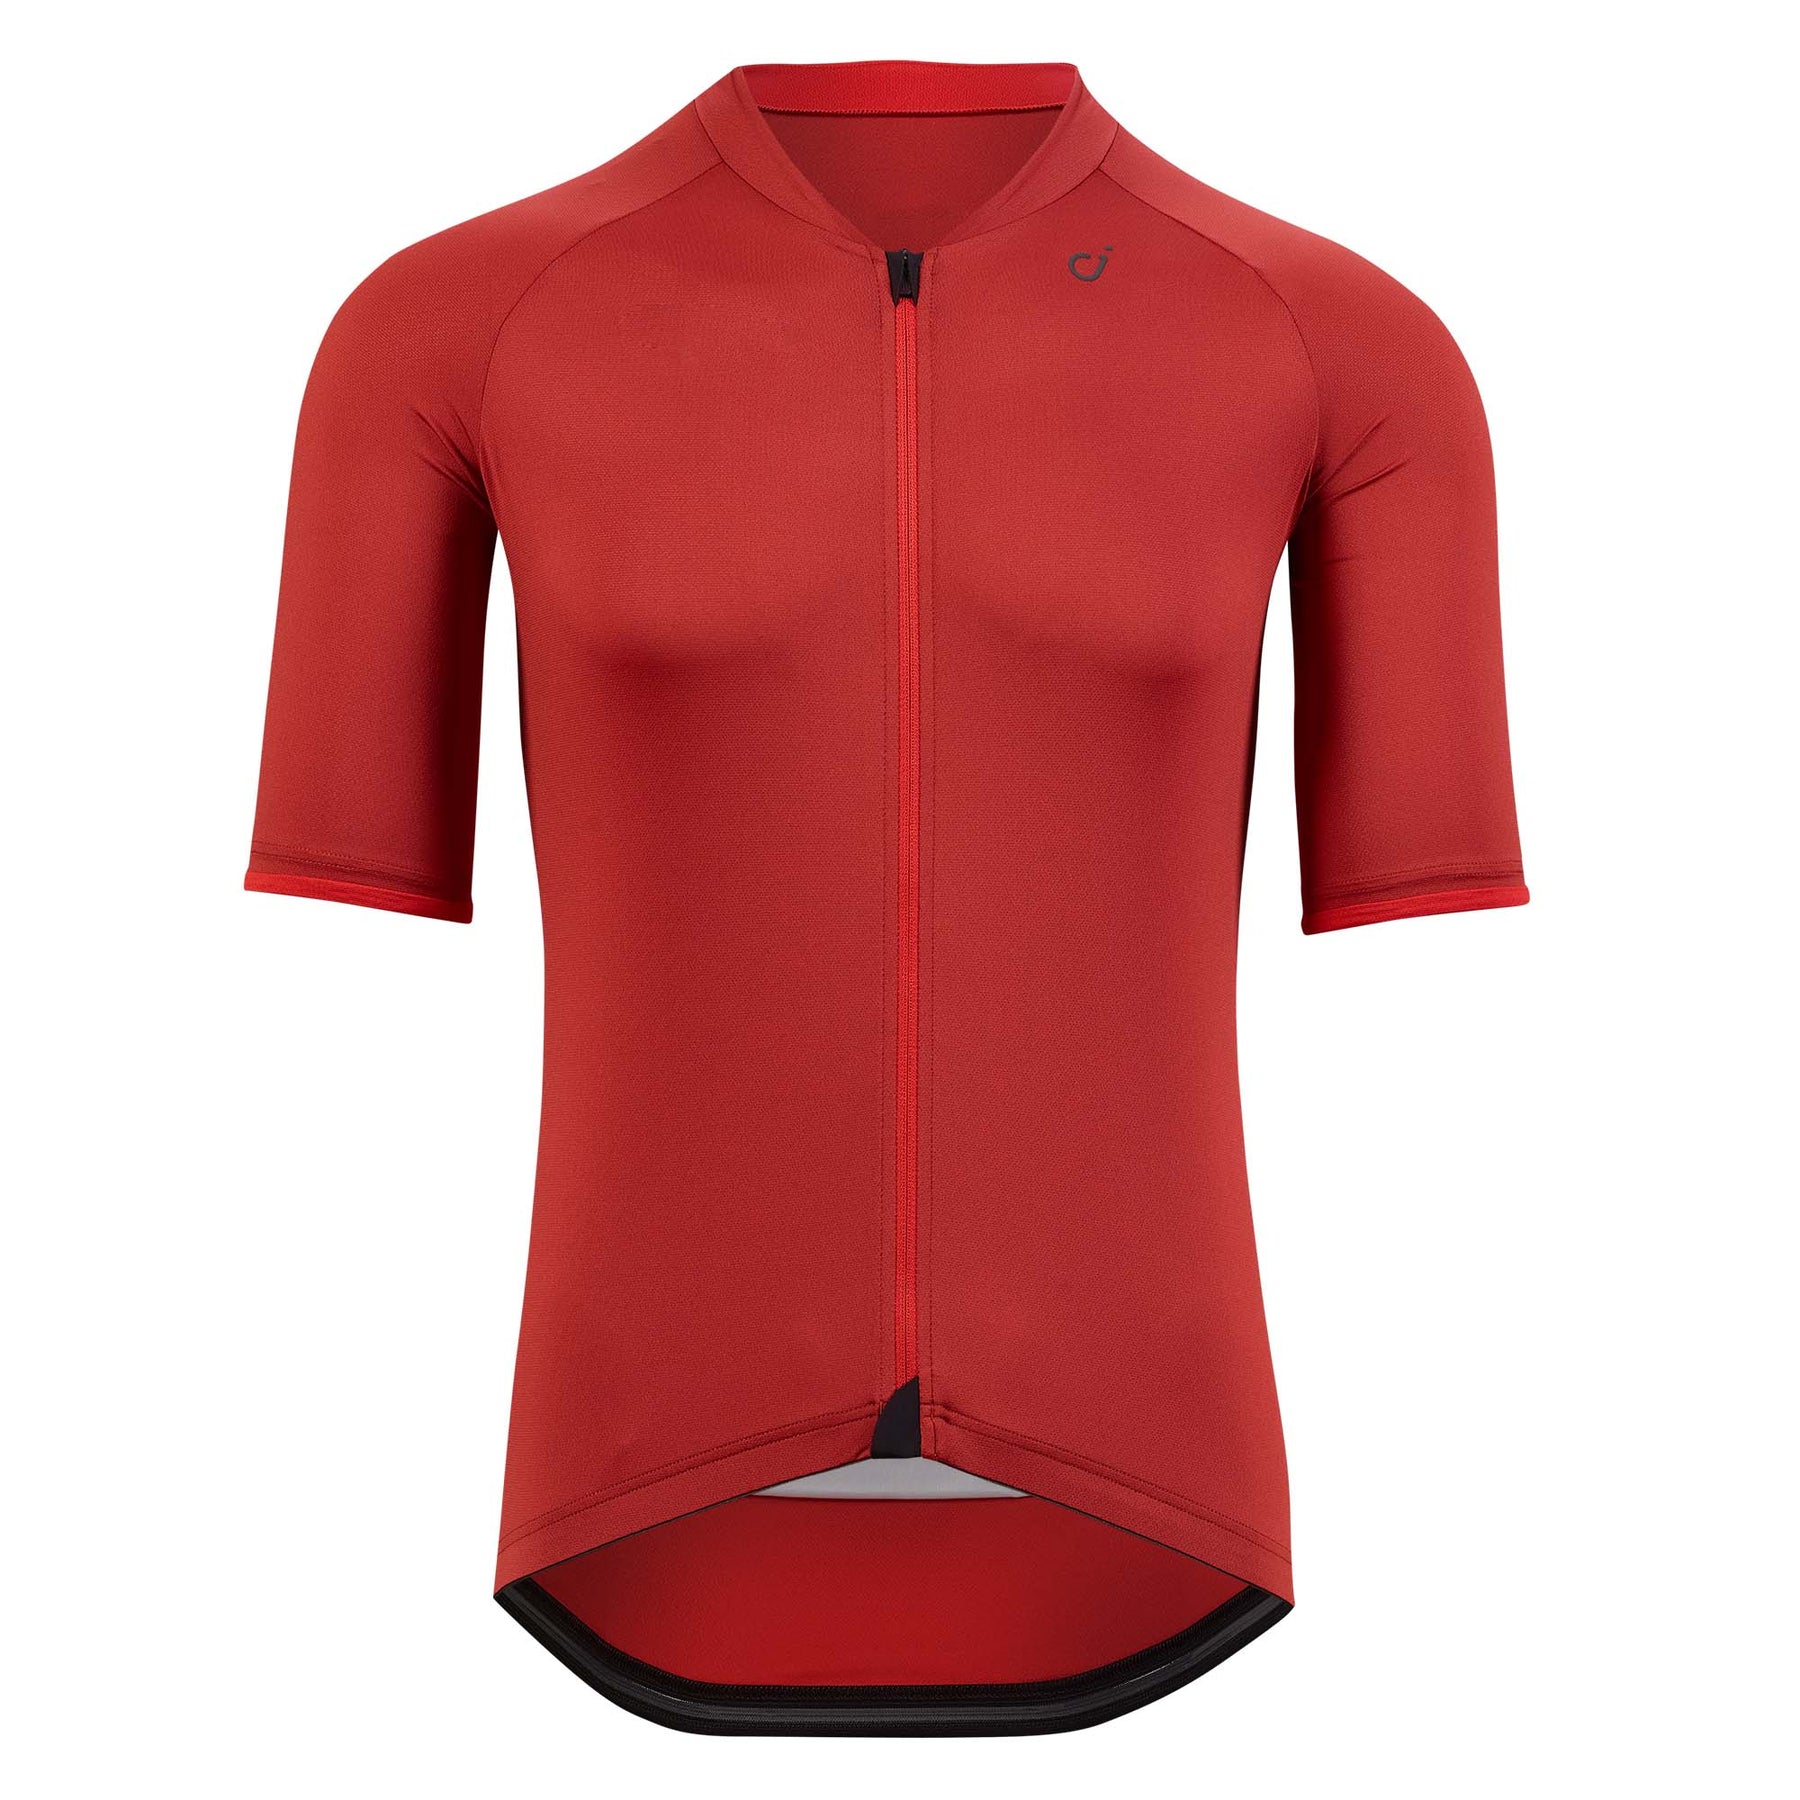 Spring Summer, Signature jersey in oxide red.